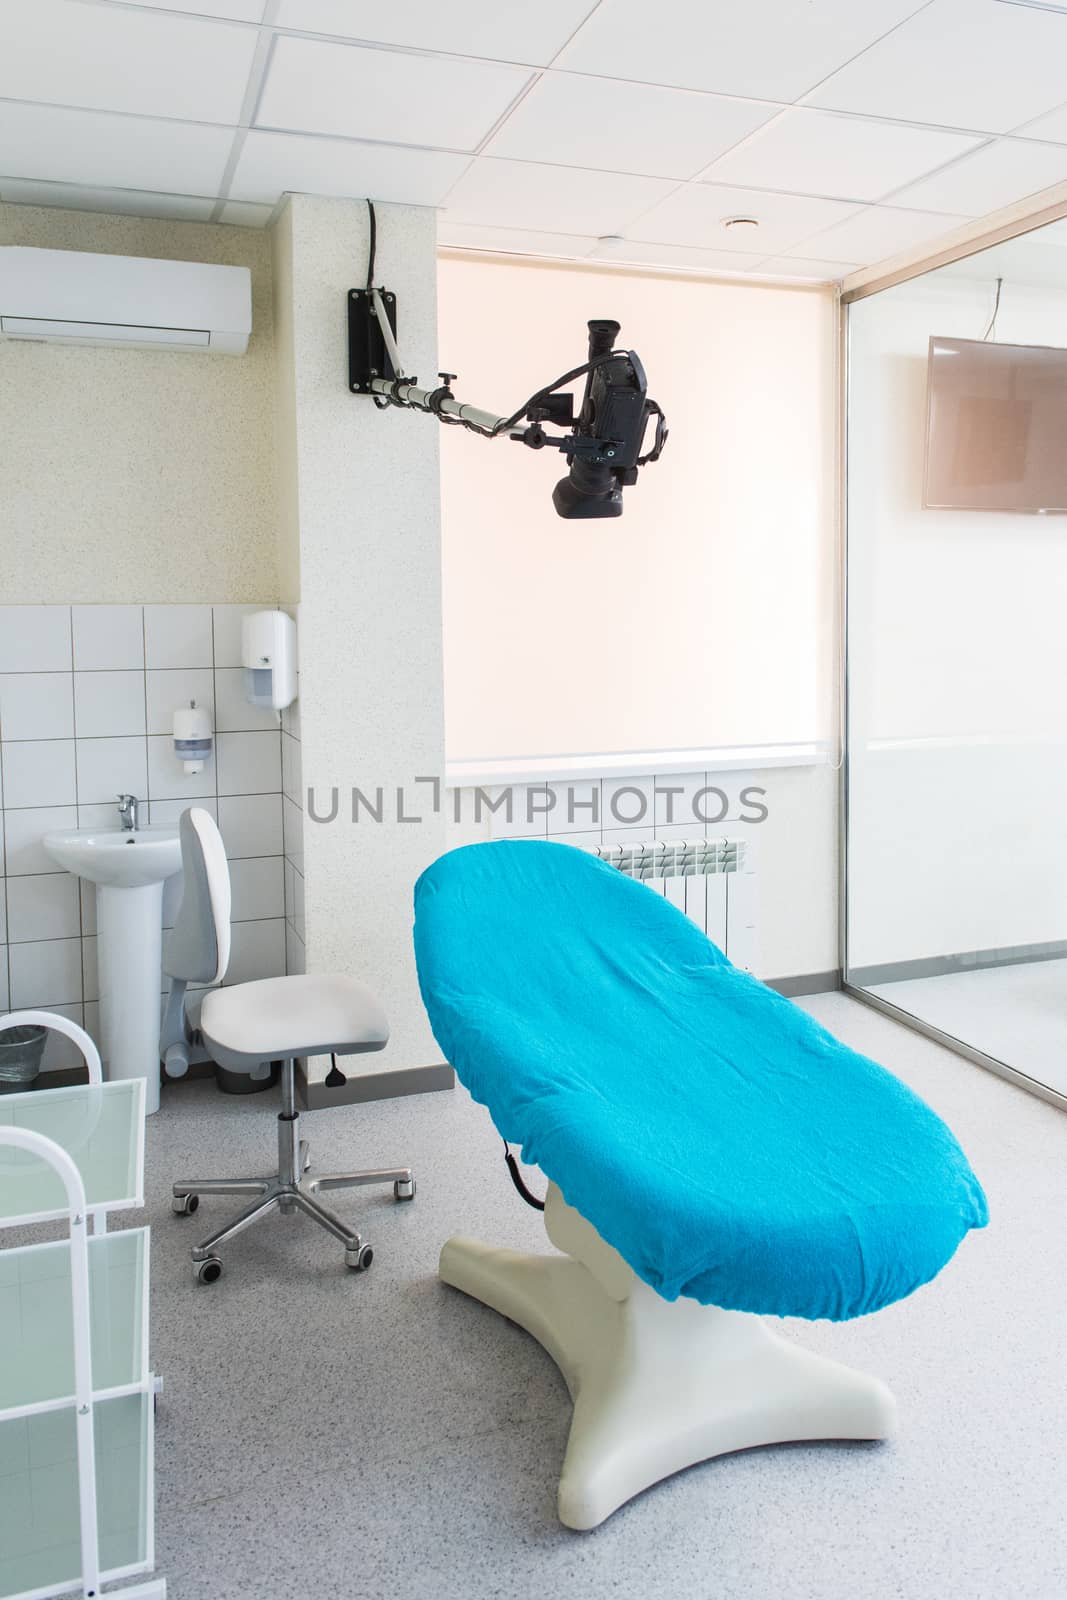 Medical chair and video camera for record or doctor's teleconference, empty cabinet